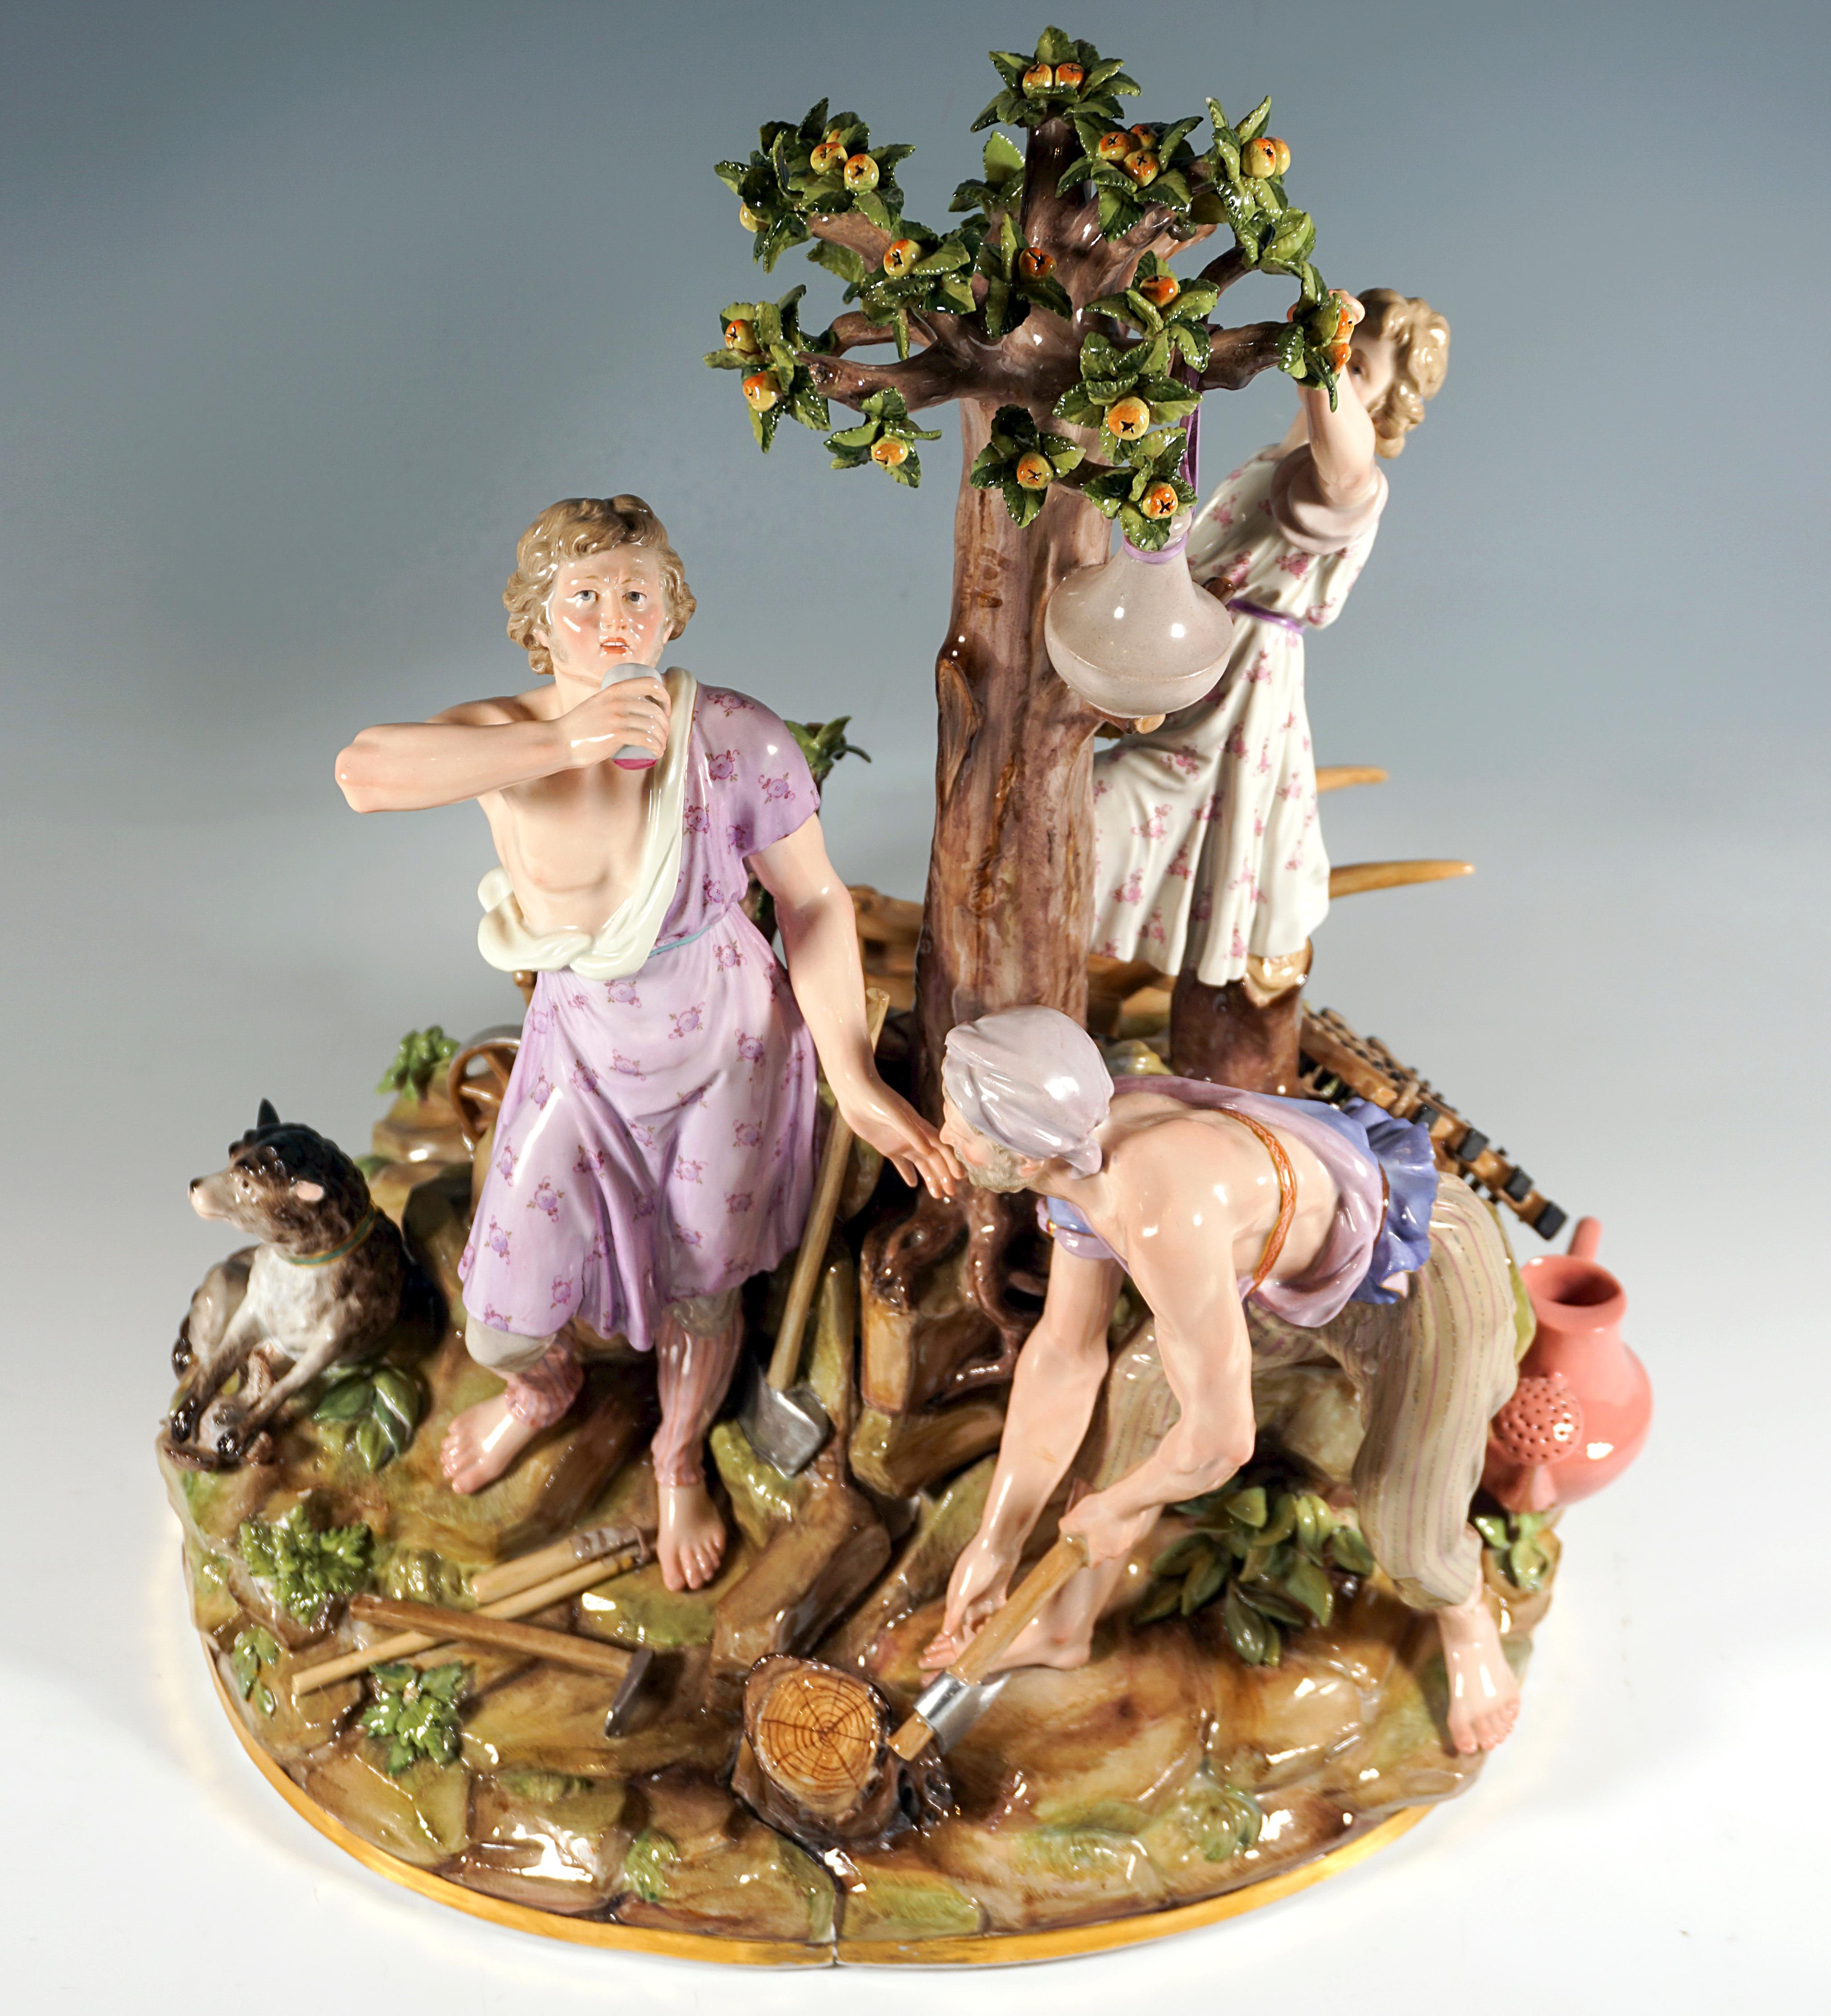 Excellent Meissen porcelain group of the 19th century.
Very large depiction of the allegory of agriculture grouped around an apple tree:
in the foreground an elderly man chopping wood, next to him, under the tree, a young man drinking from a cup of